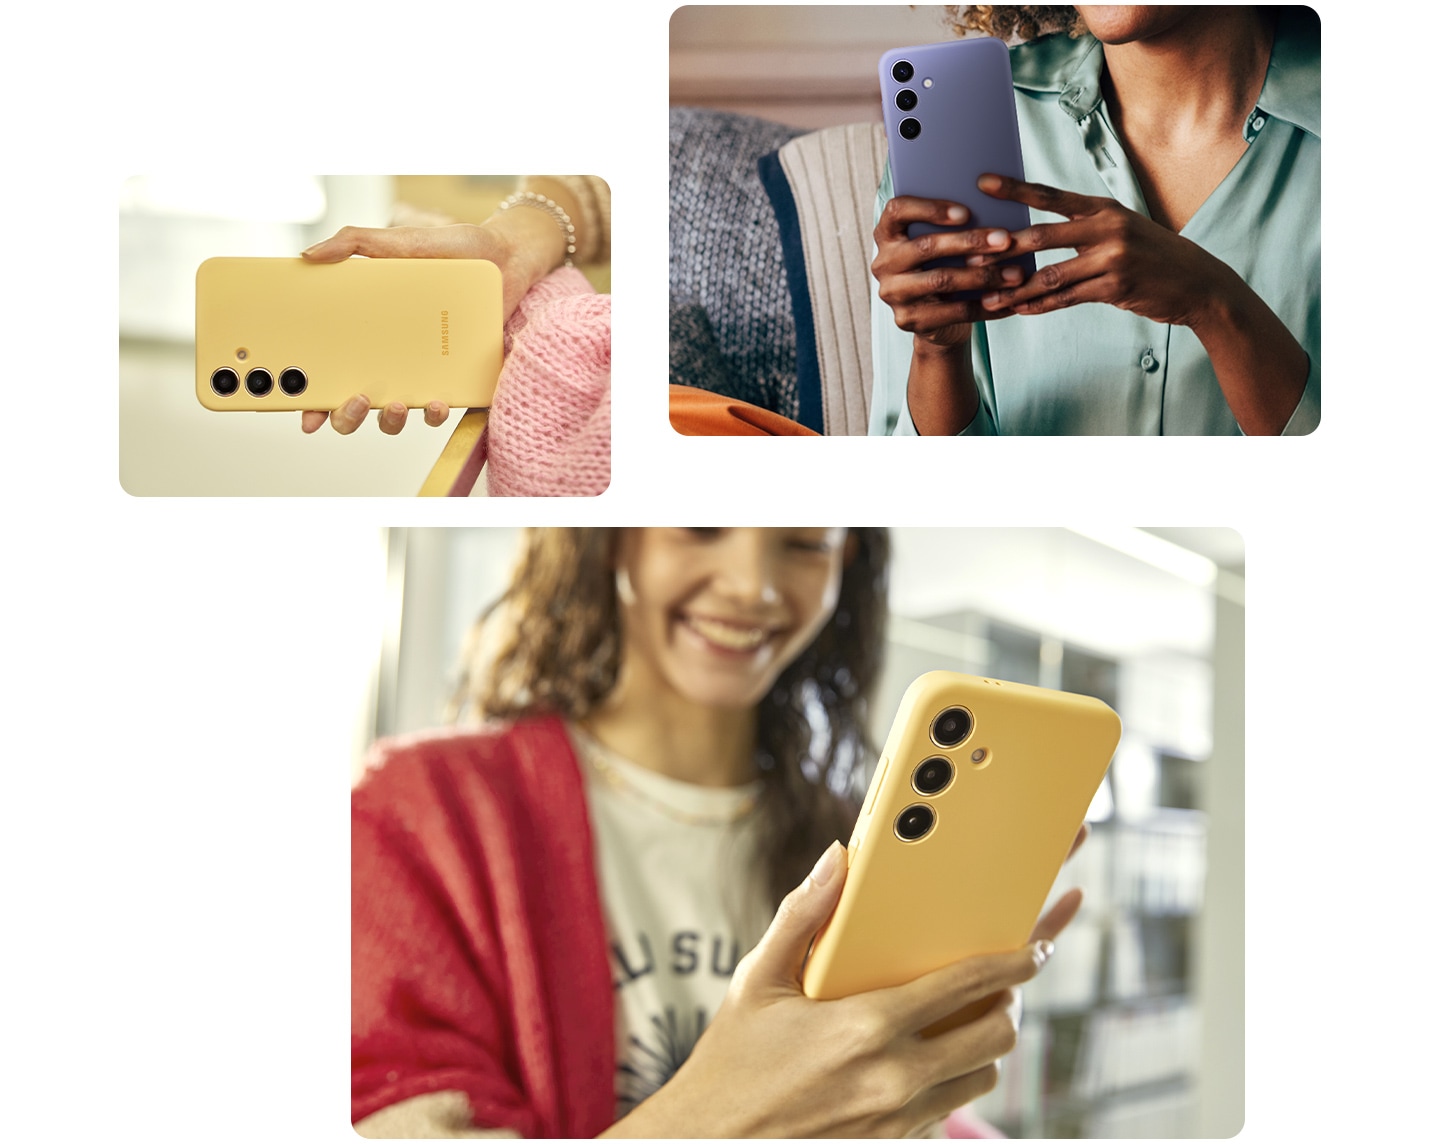 On the top left, a woman is comfortably holding the Galaxy S24 Plus in a violet Silicone case. Below, two different shots show a person holding a Galaxy S24 Plus in a yellow Silicone case with one hand, showing the ease of its grip.